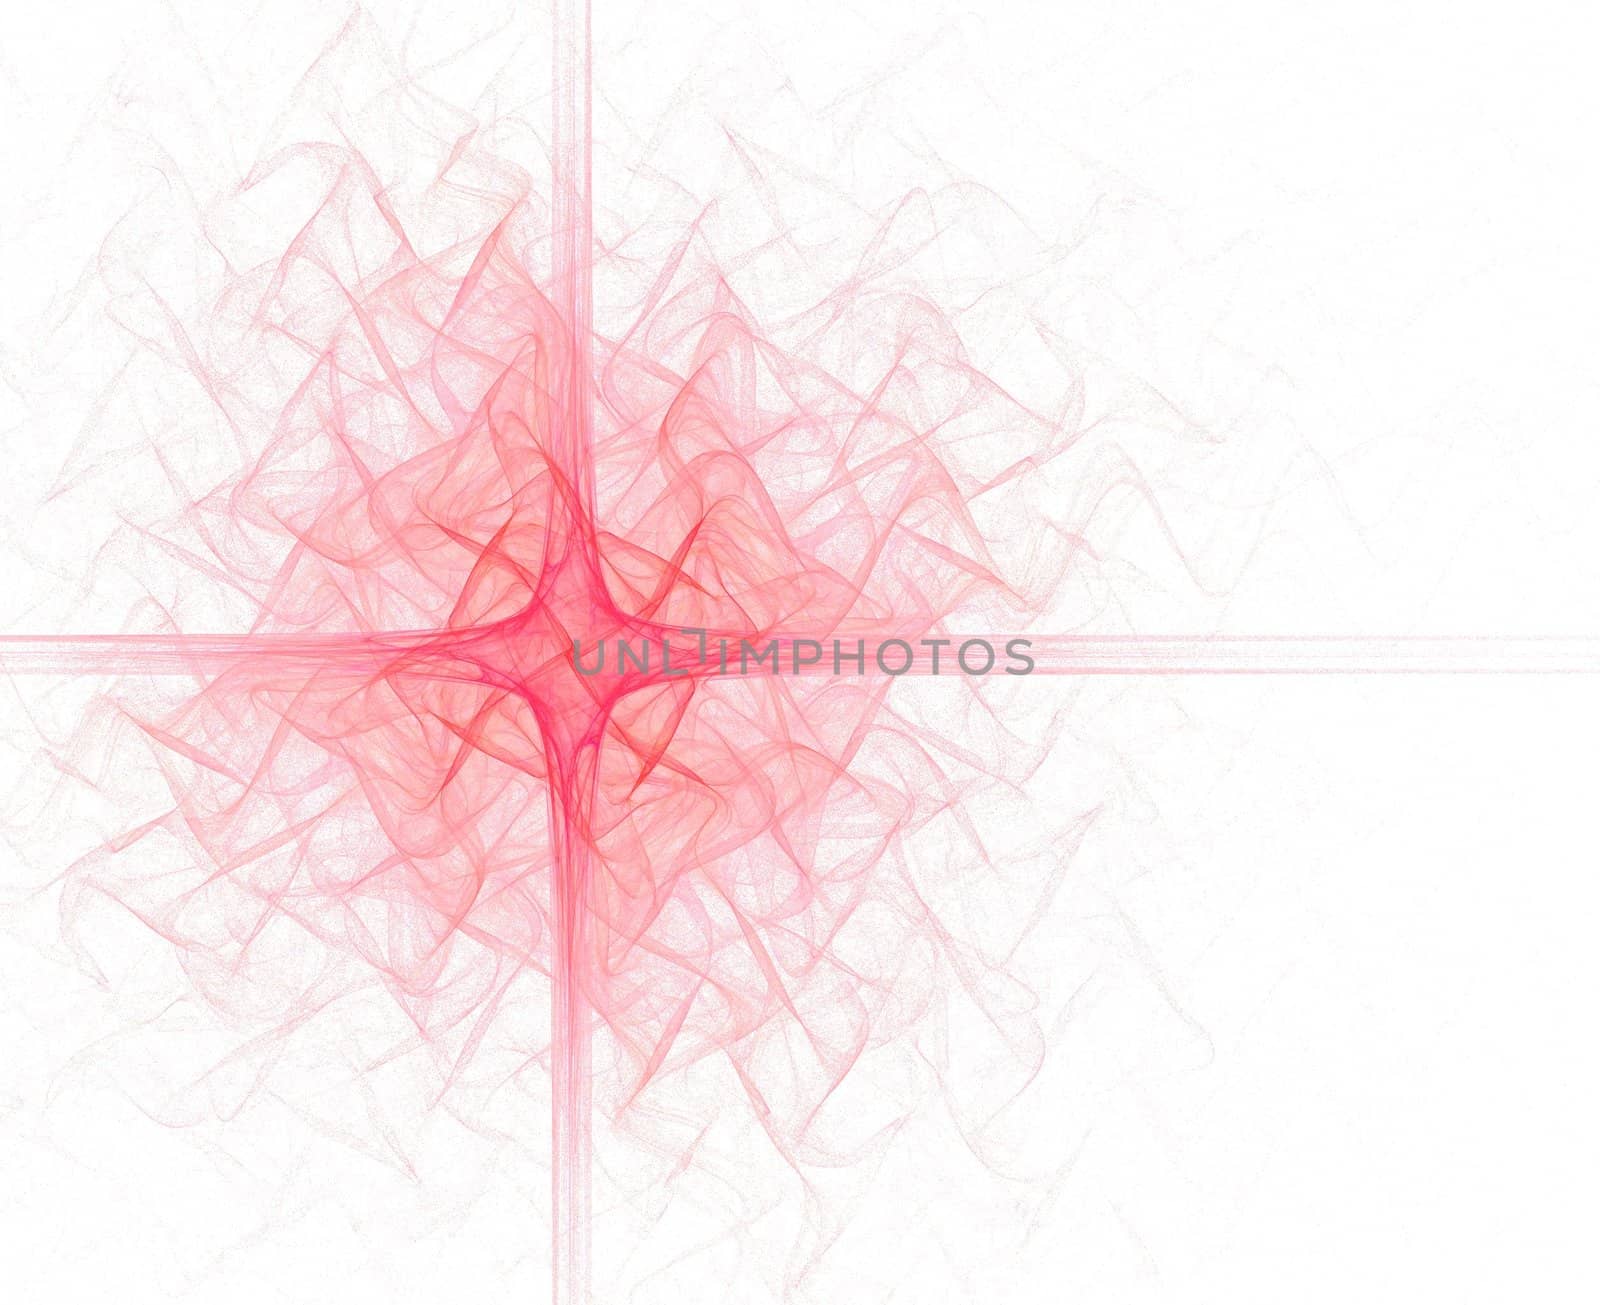 high resolution flame fractal forming a classic cross, plenty of copy space